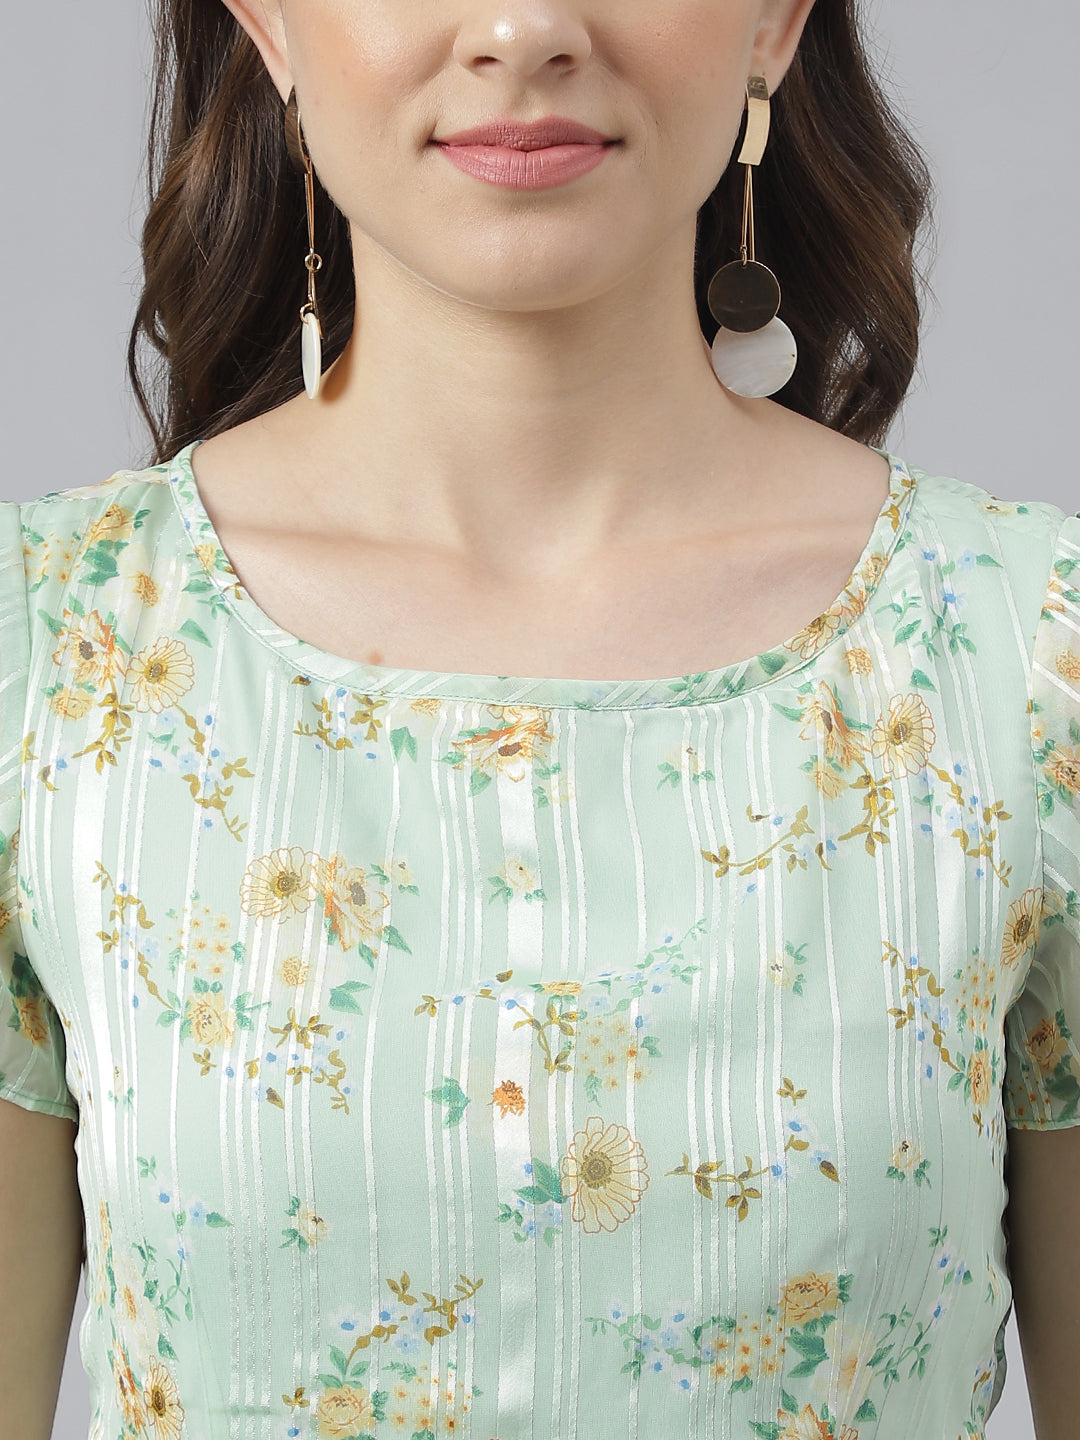 Green Floral Printed Cap Sleeve With Round Neck Asymmetric Dress